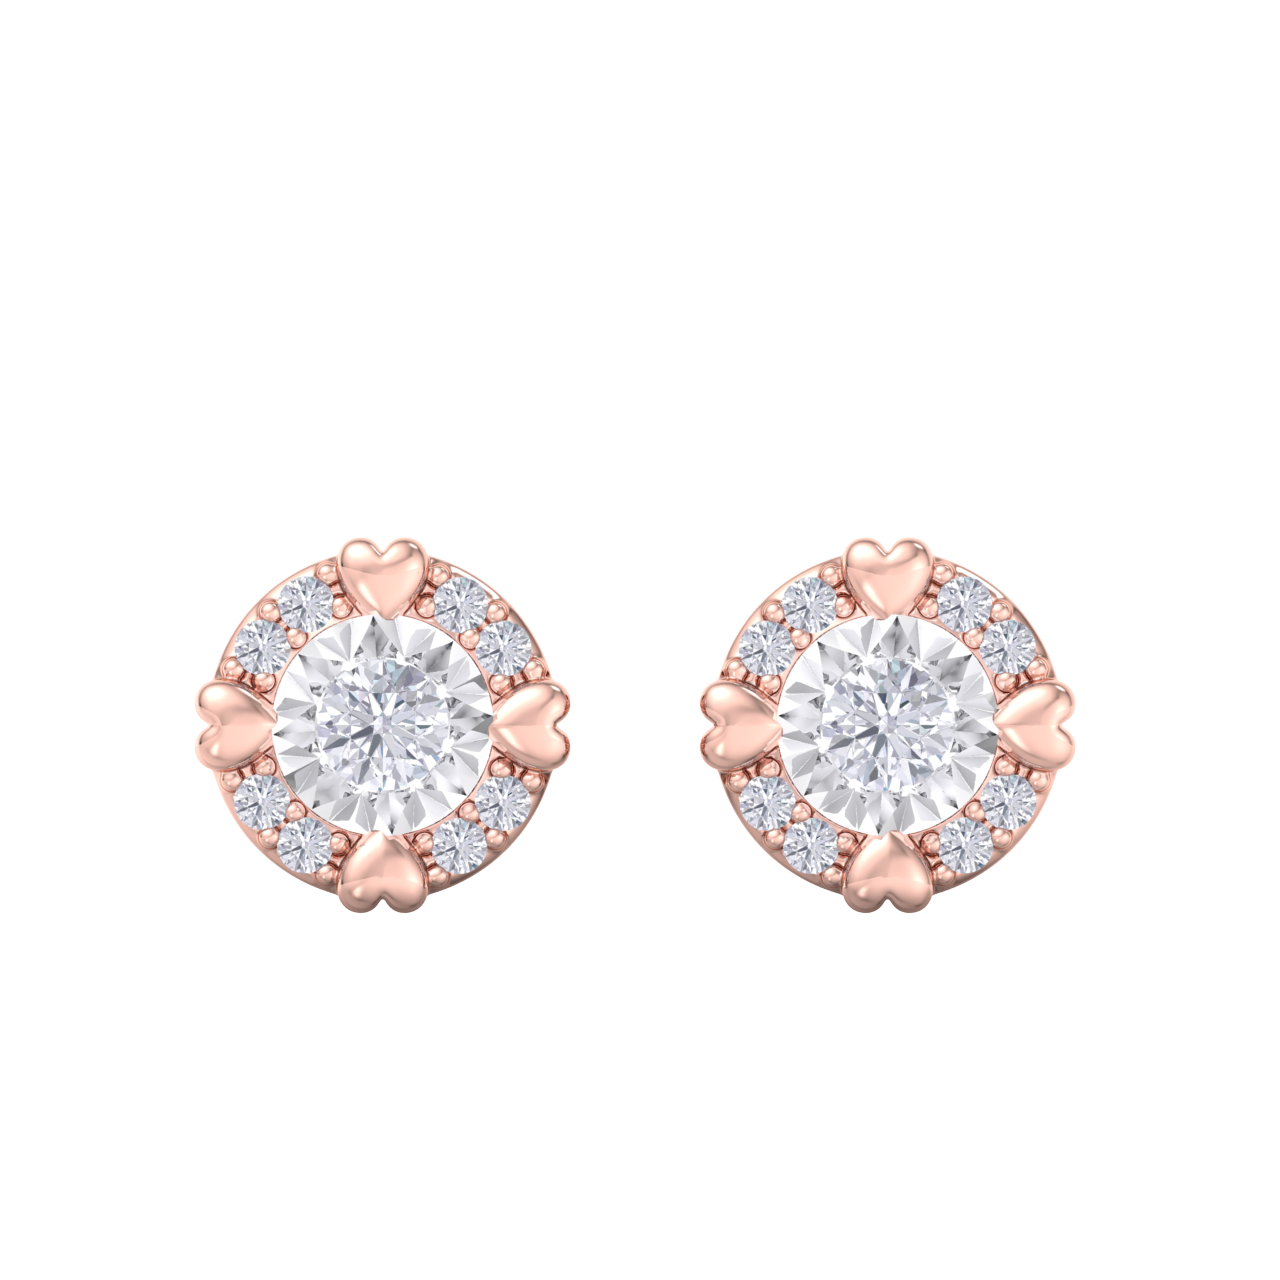 Halo earrings with miracle plate in yellow gold with white diamonds of 0.20 ct in weight